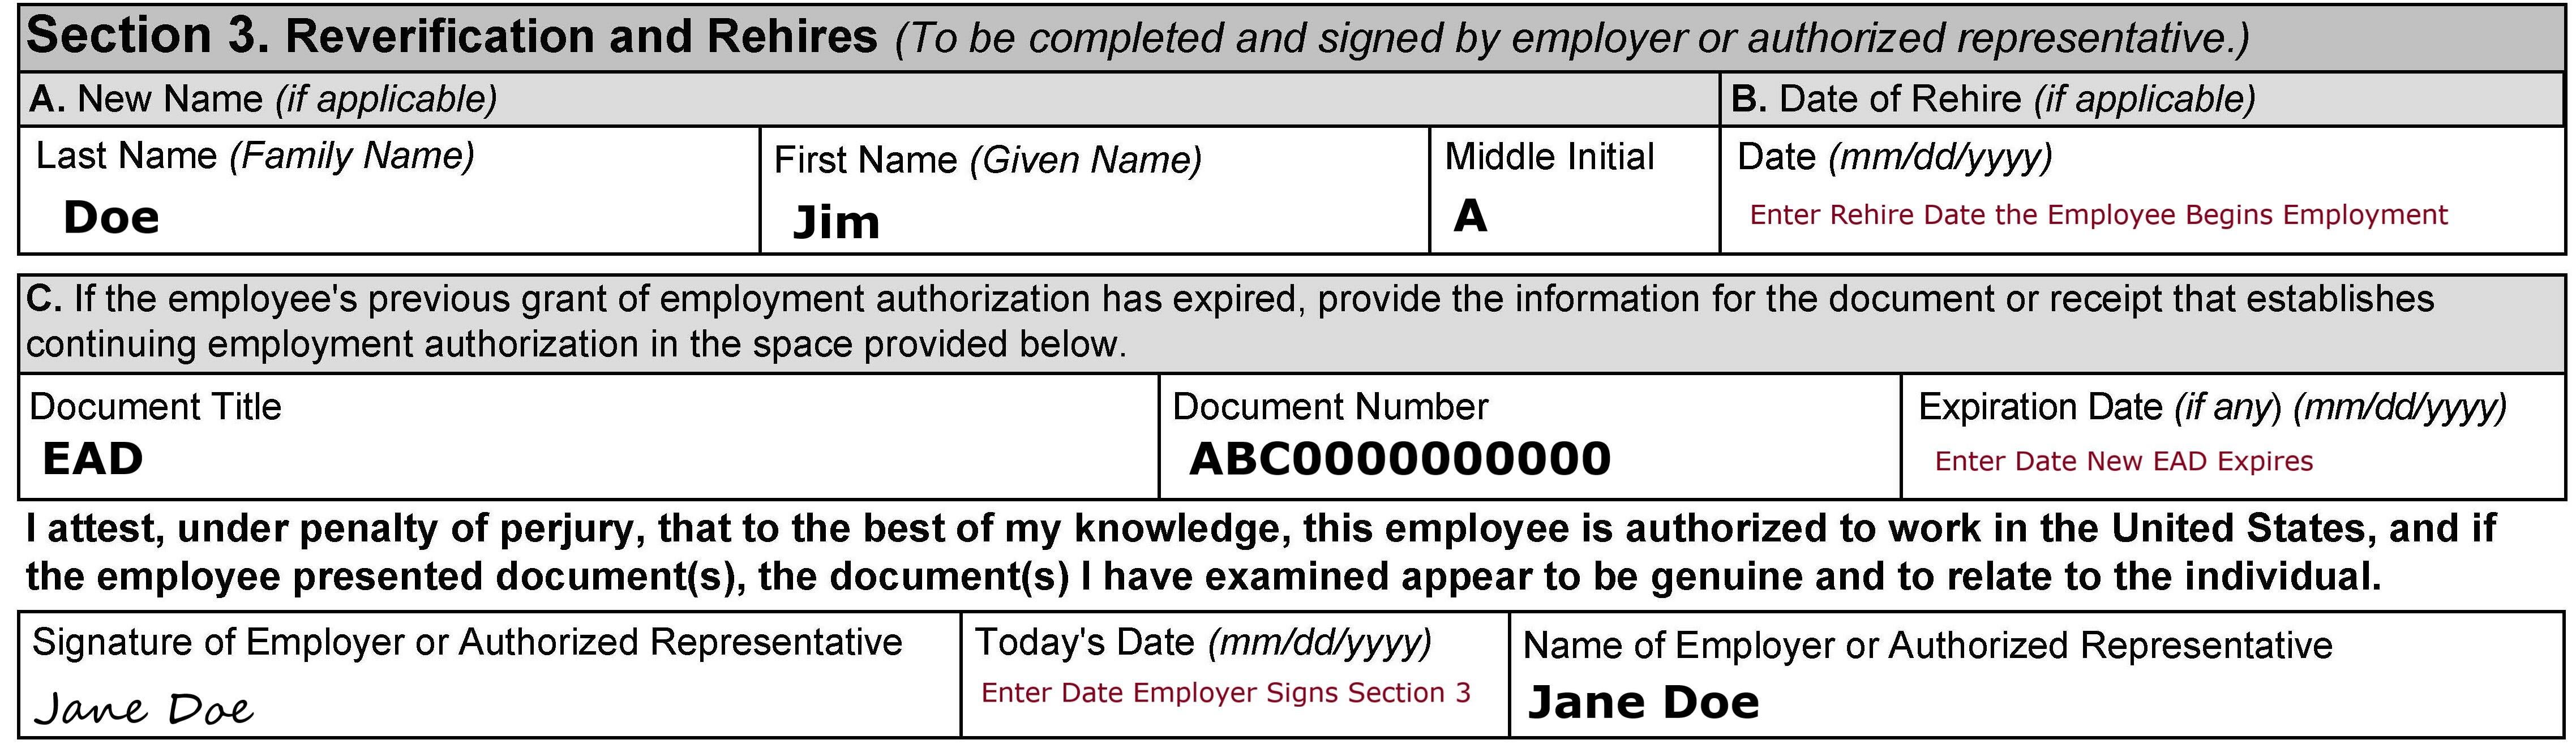 Image of an example Section 3 of Form I-9 completed by an employer: The example shows all of the fields fully completed. The example also instructs employers to enter the date the employee began employment in the “Date or Rehire” field, and the date the employer completes Section 3 in the “Today’s Date” field. complete Section 1 in the Today’s Date field.